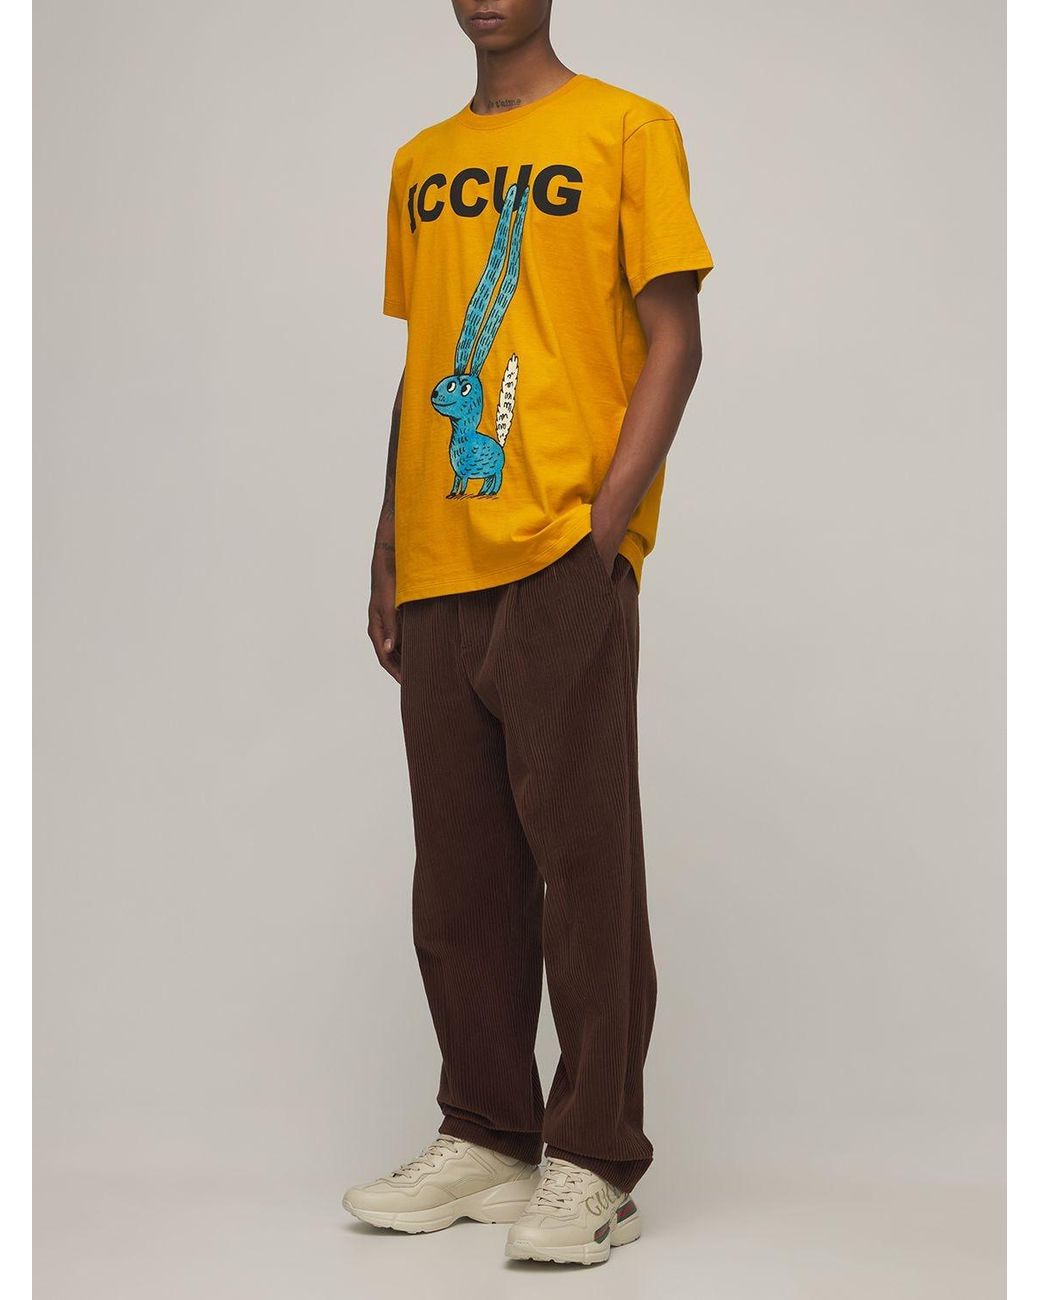 Gucci Iccug Animal Print Cotton T-shirt in Yellow for Men | Lyst